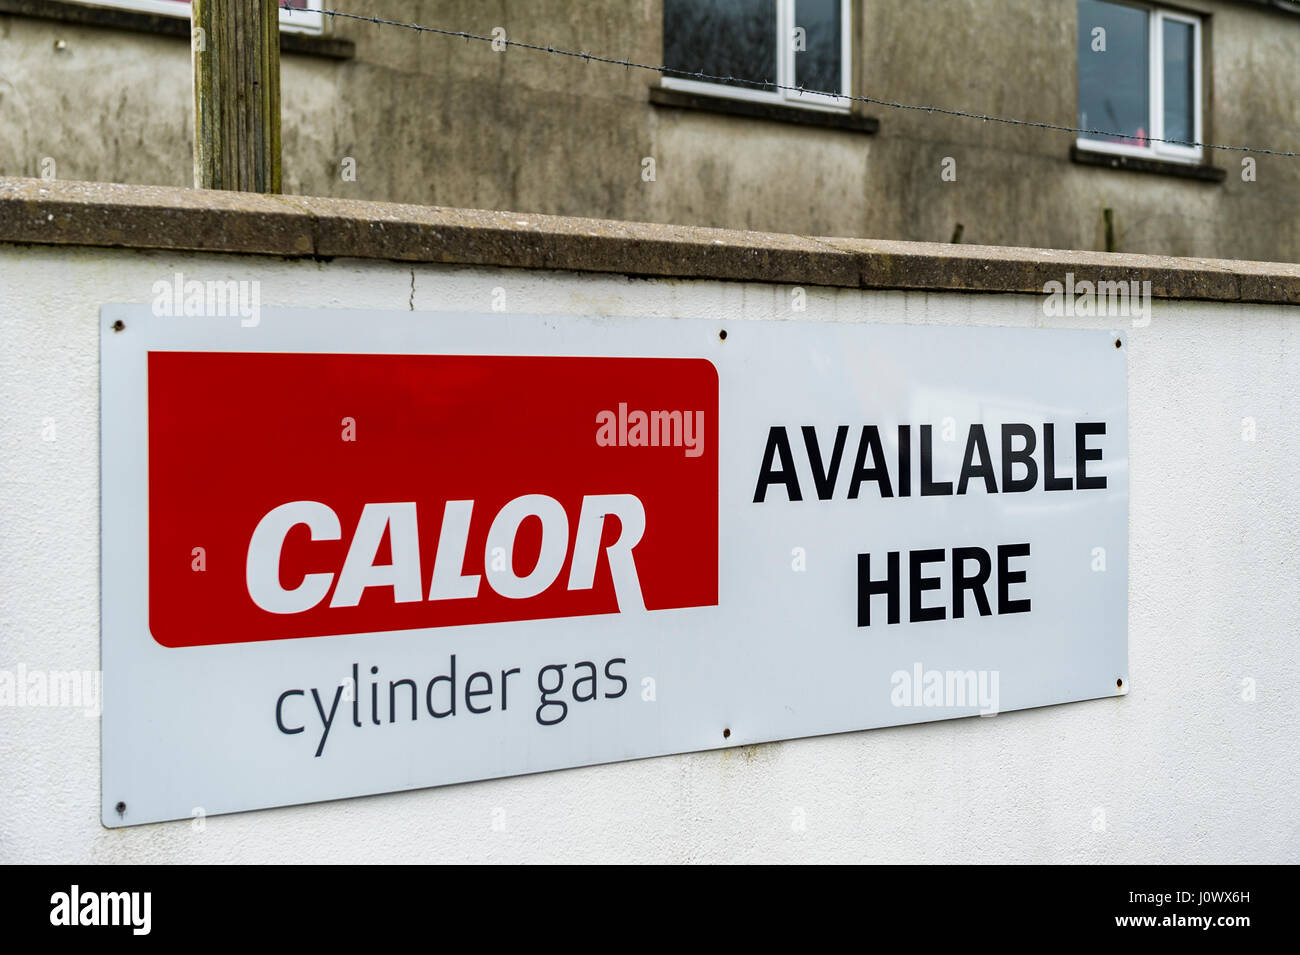 Calor cylinder gas available here for sale metal sign on a white wall with copy space. Stock Photo